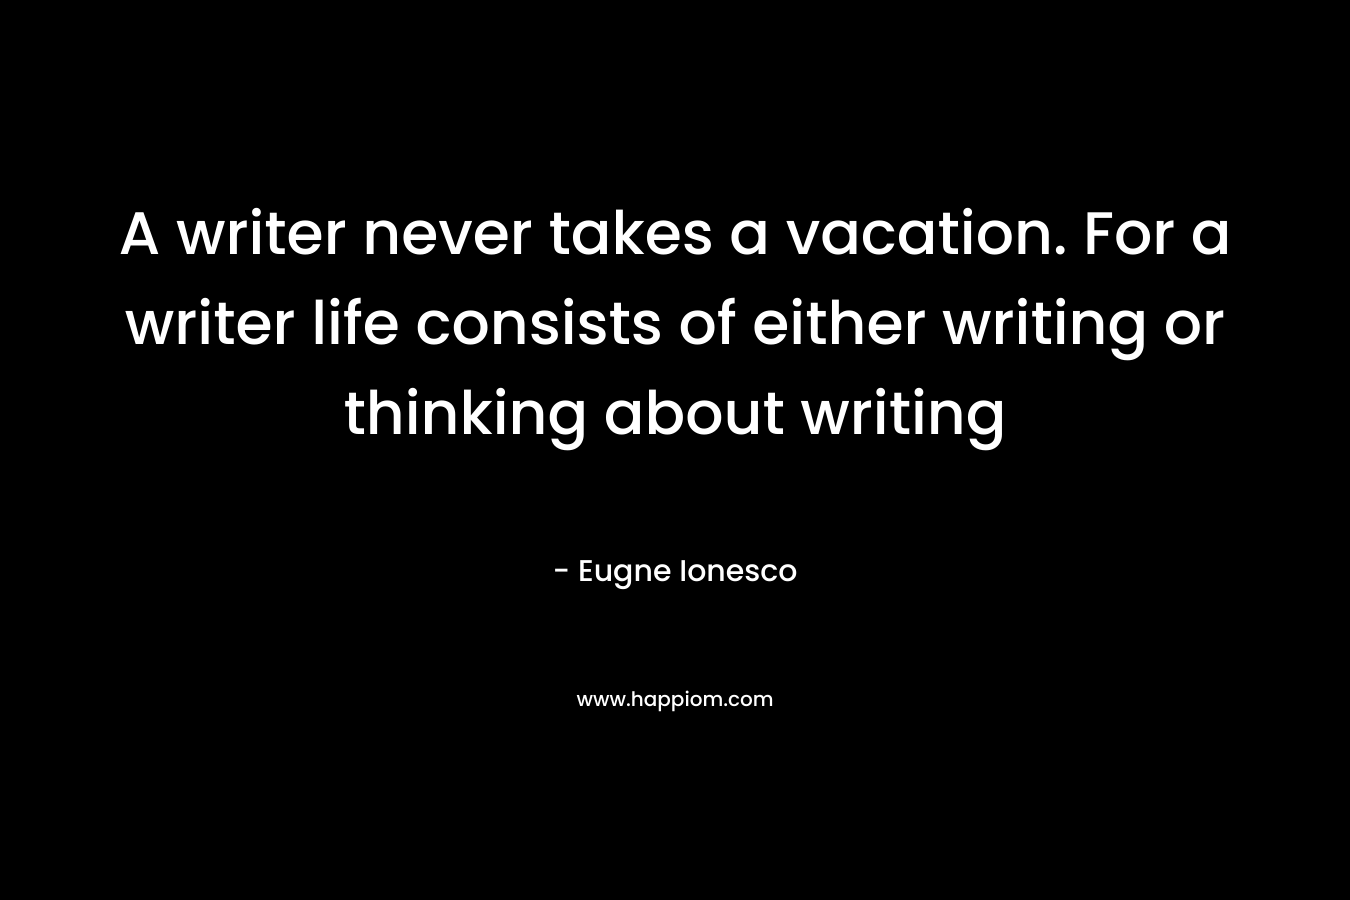 A writer never takes a vacation. For a writer life consists of either writing or thinking about writing – Eugne Ionesco